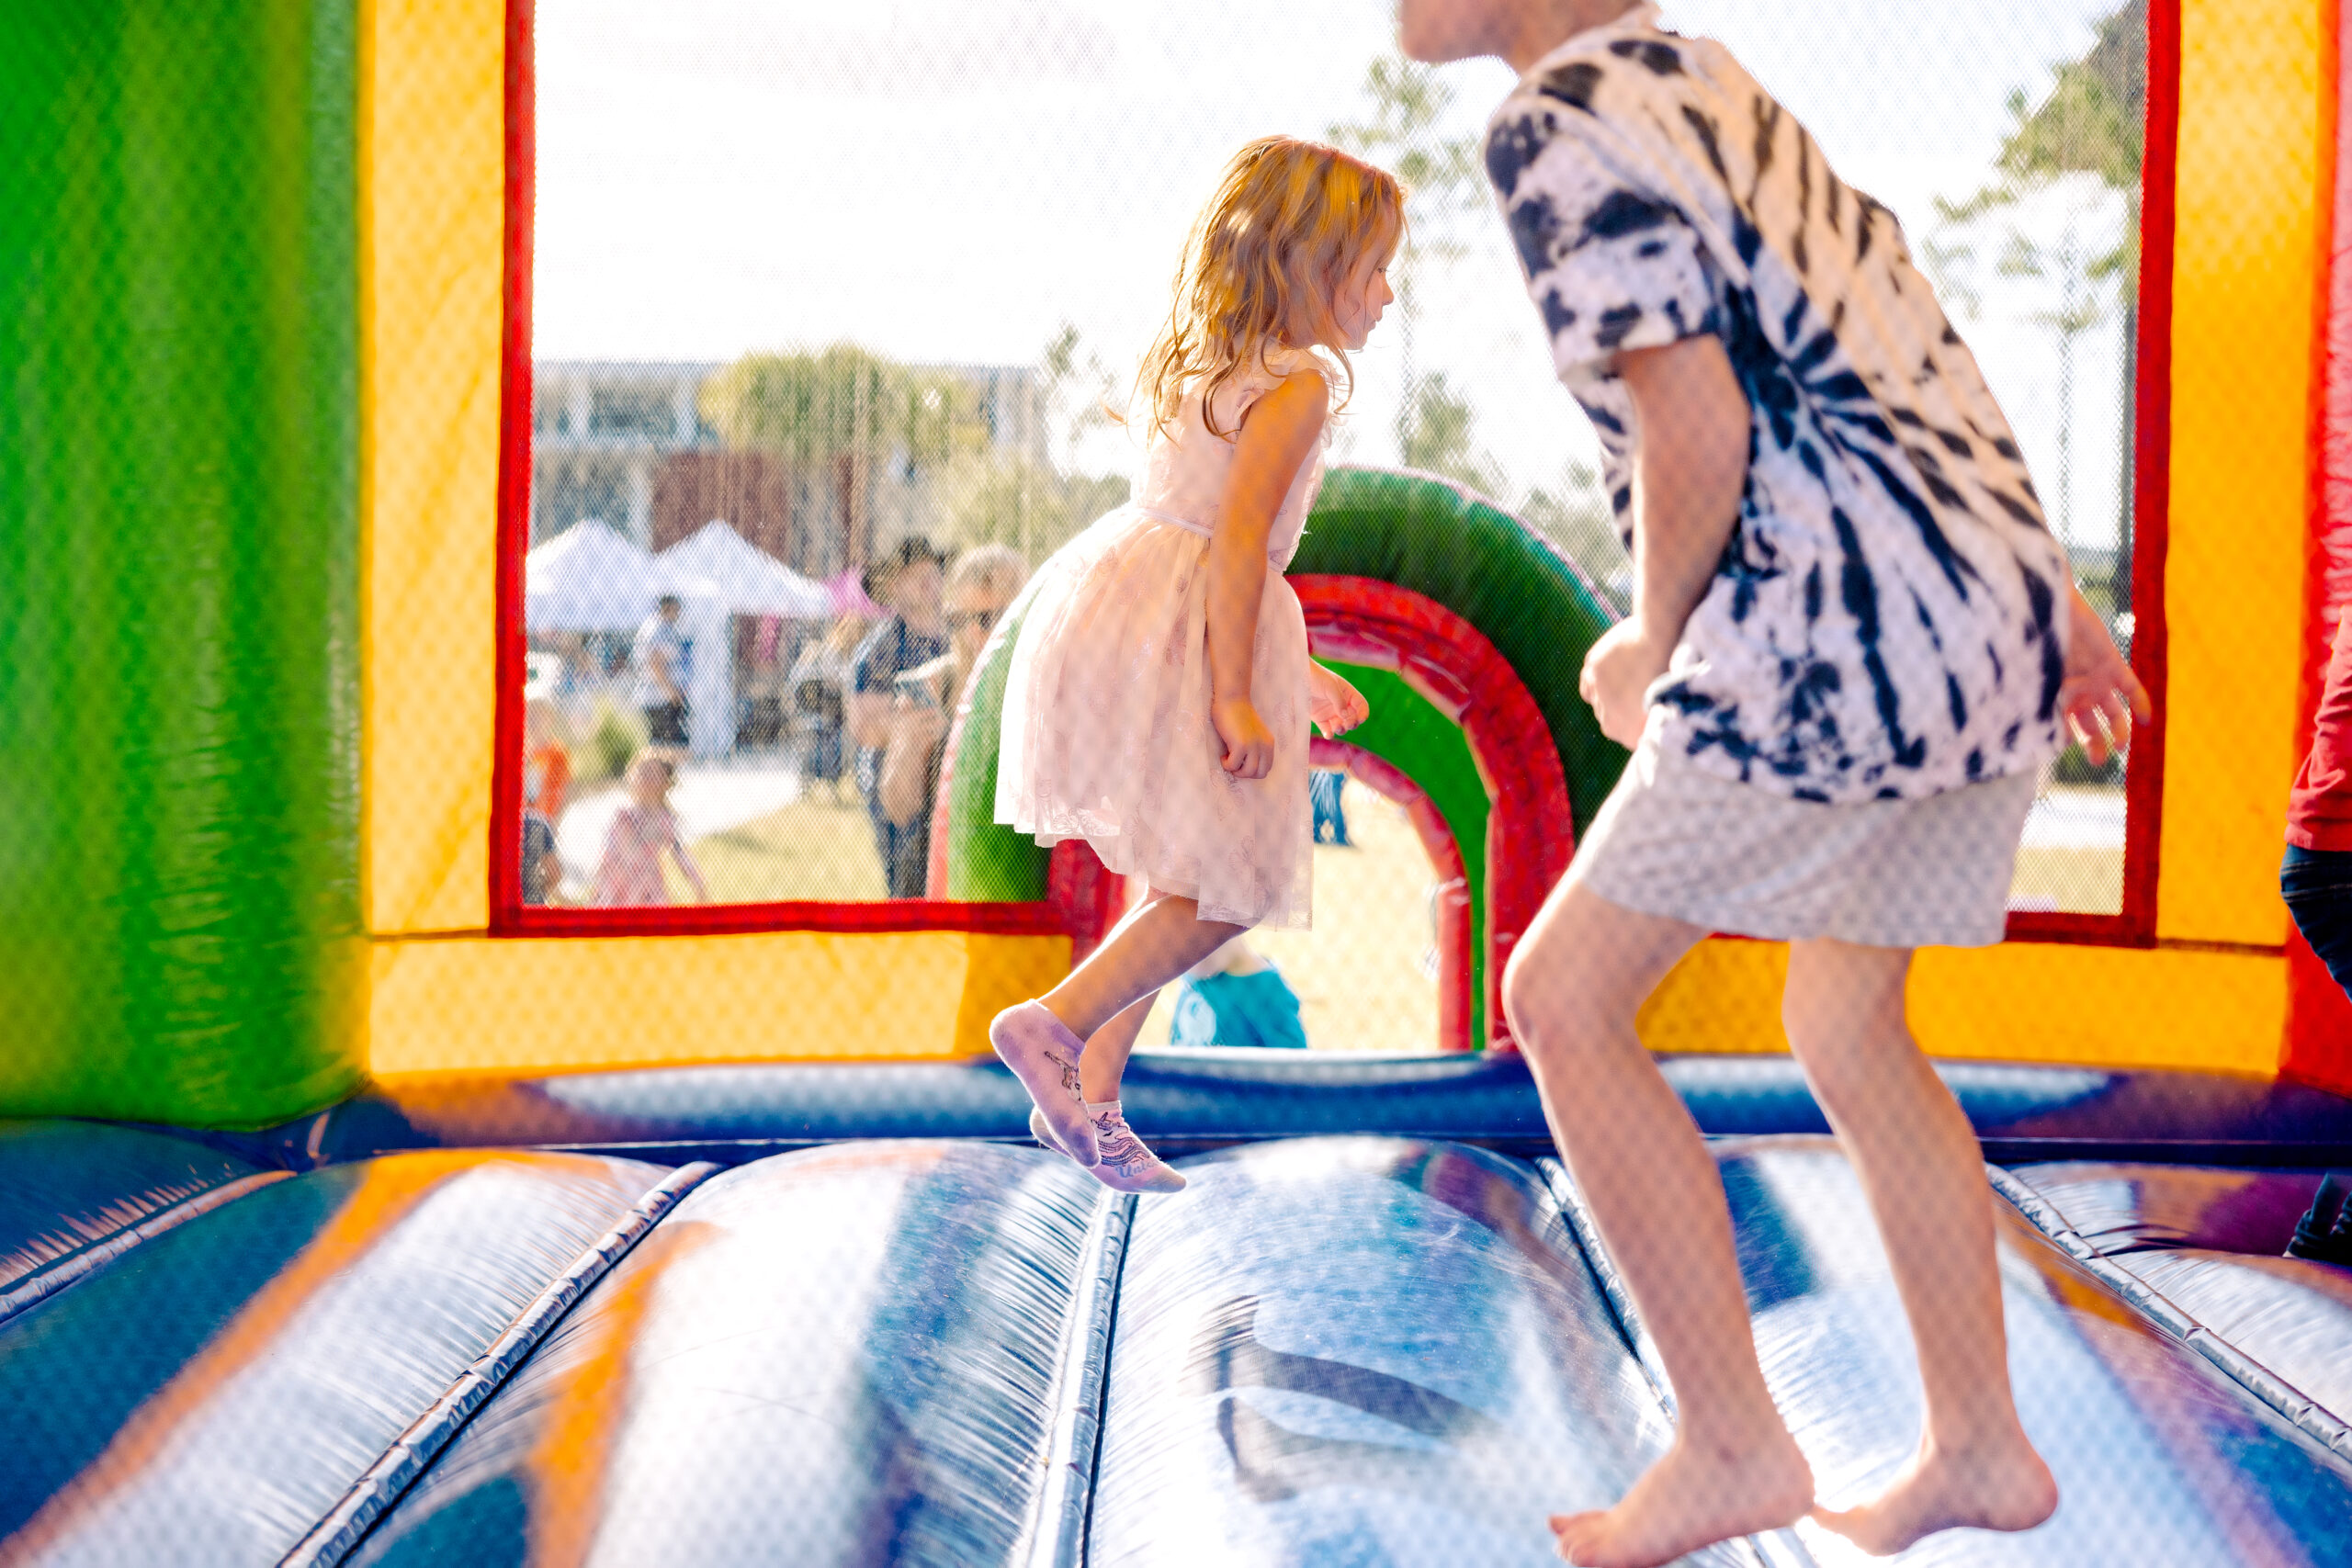 Two children playing on an inflatable bouncer at an outdoor event.